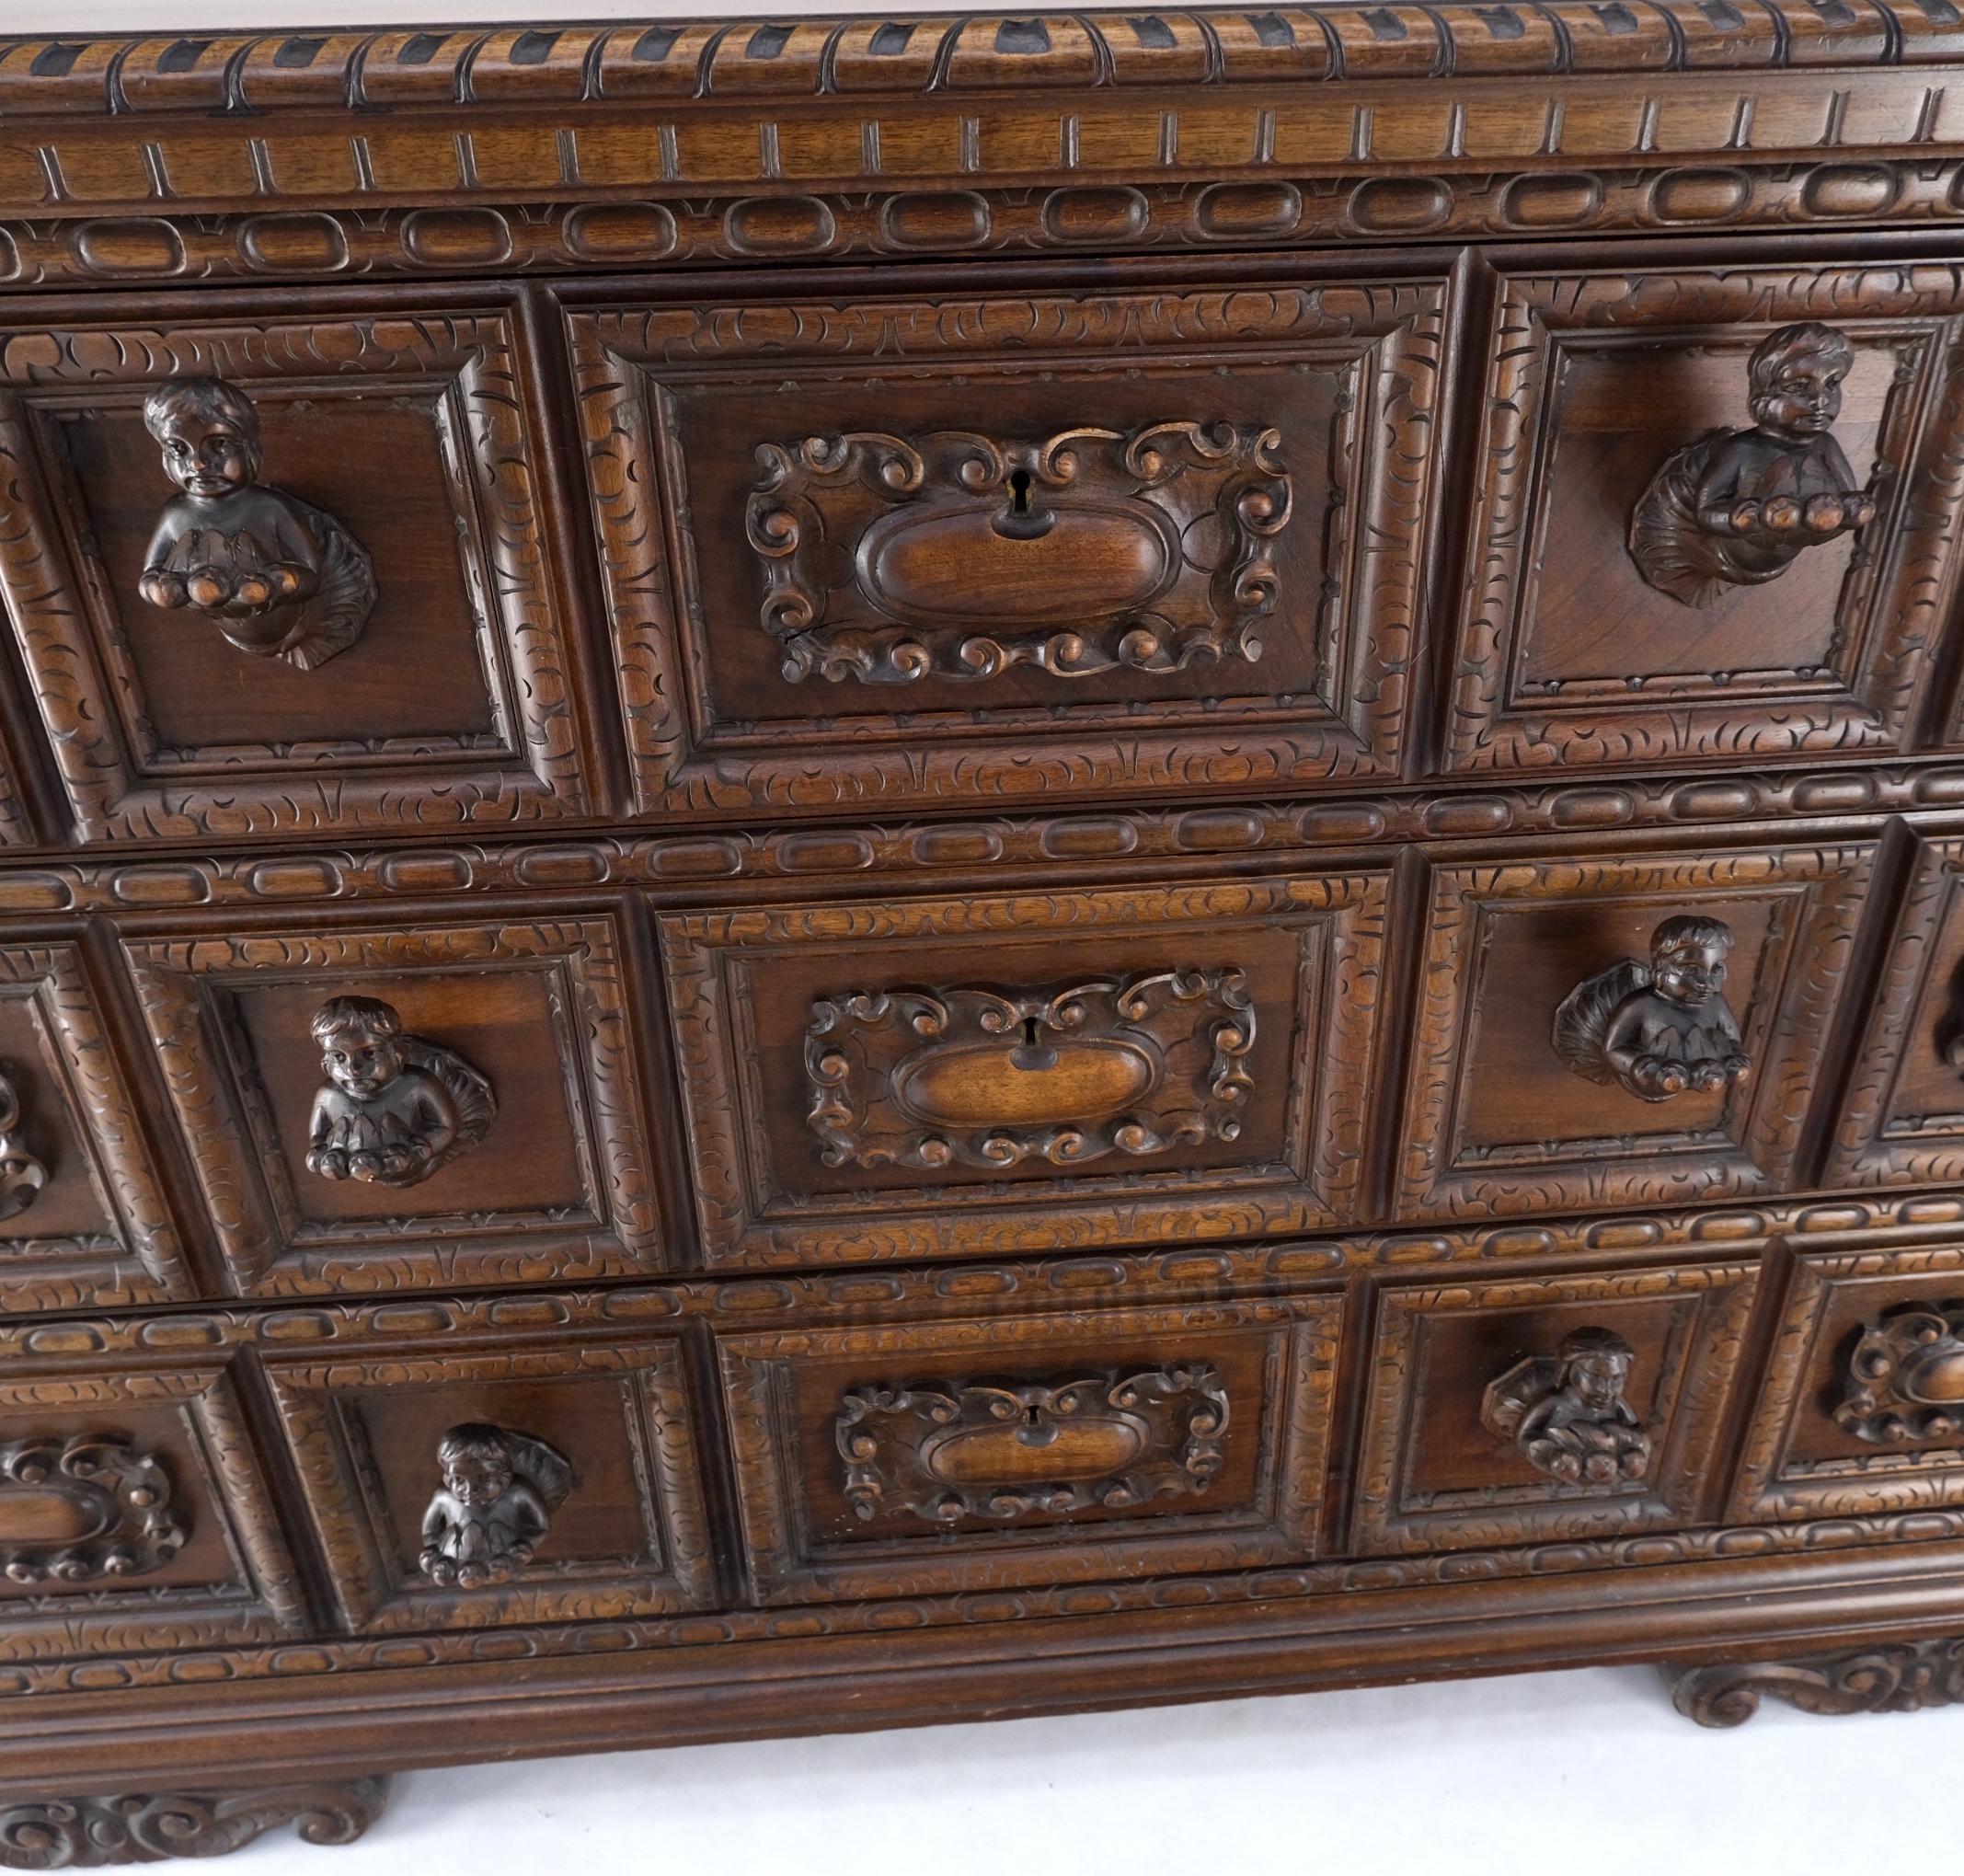 Maple 3 Dovetail Drawers Heavily Carved Wooden Pulls Rope Edge Bachelor Chest Dresser For Sale